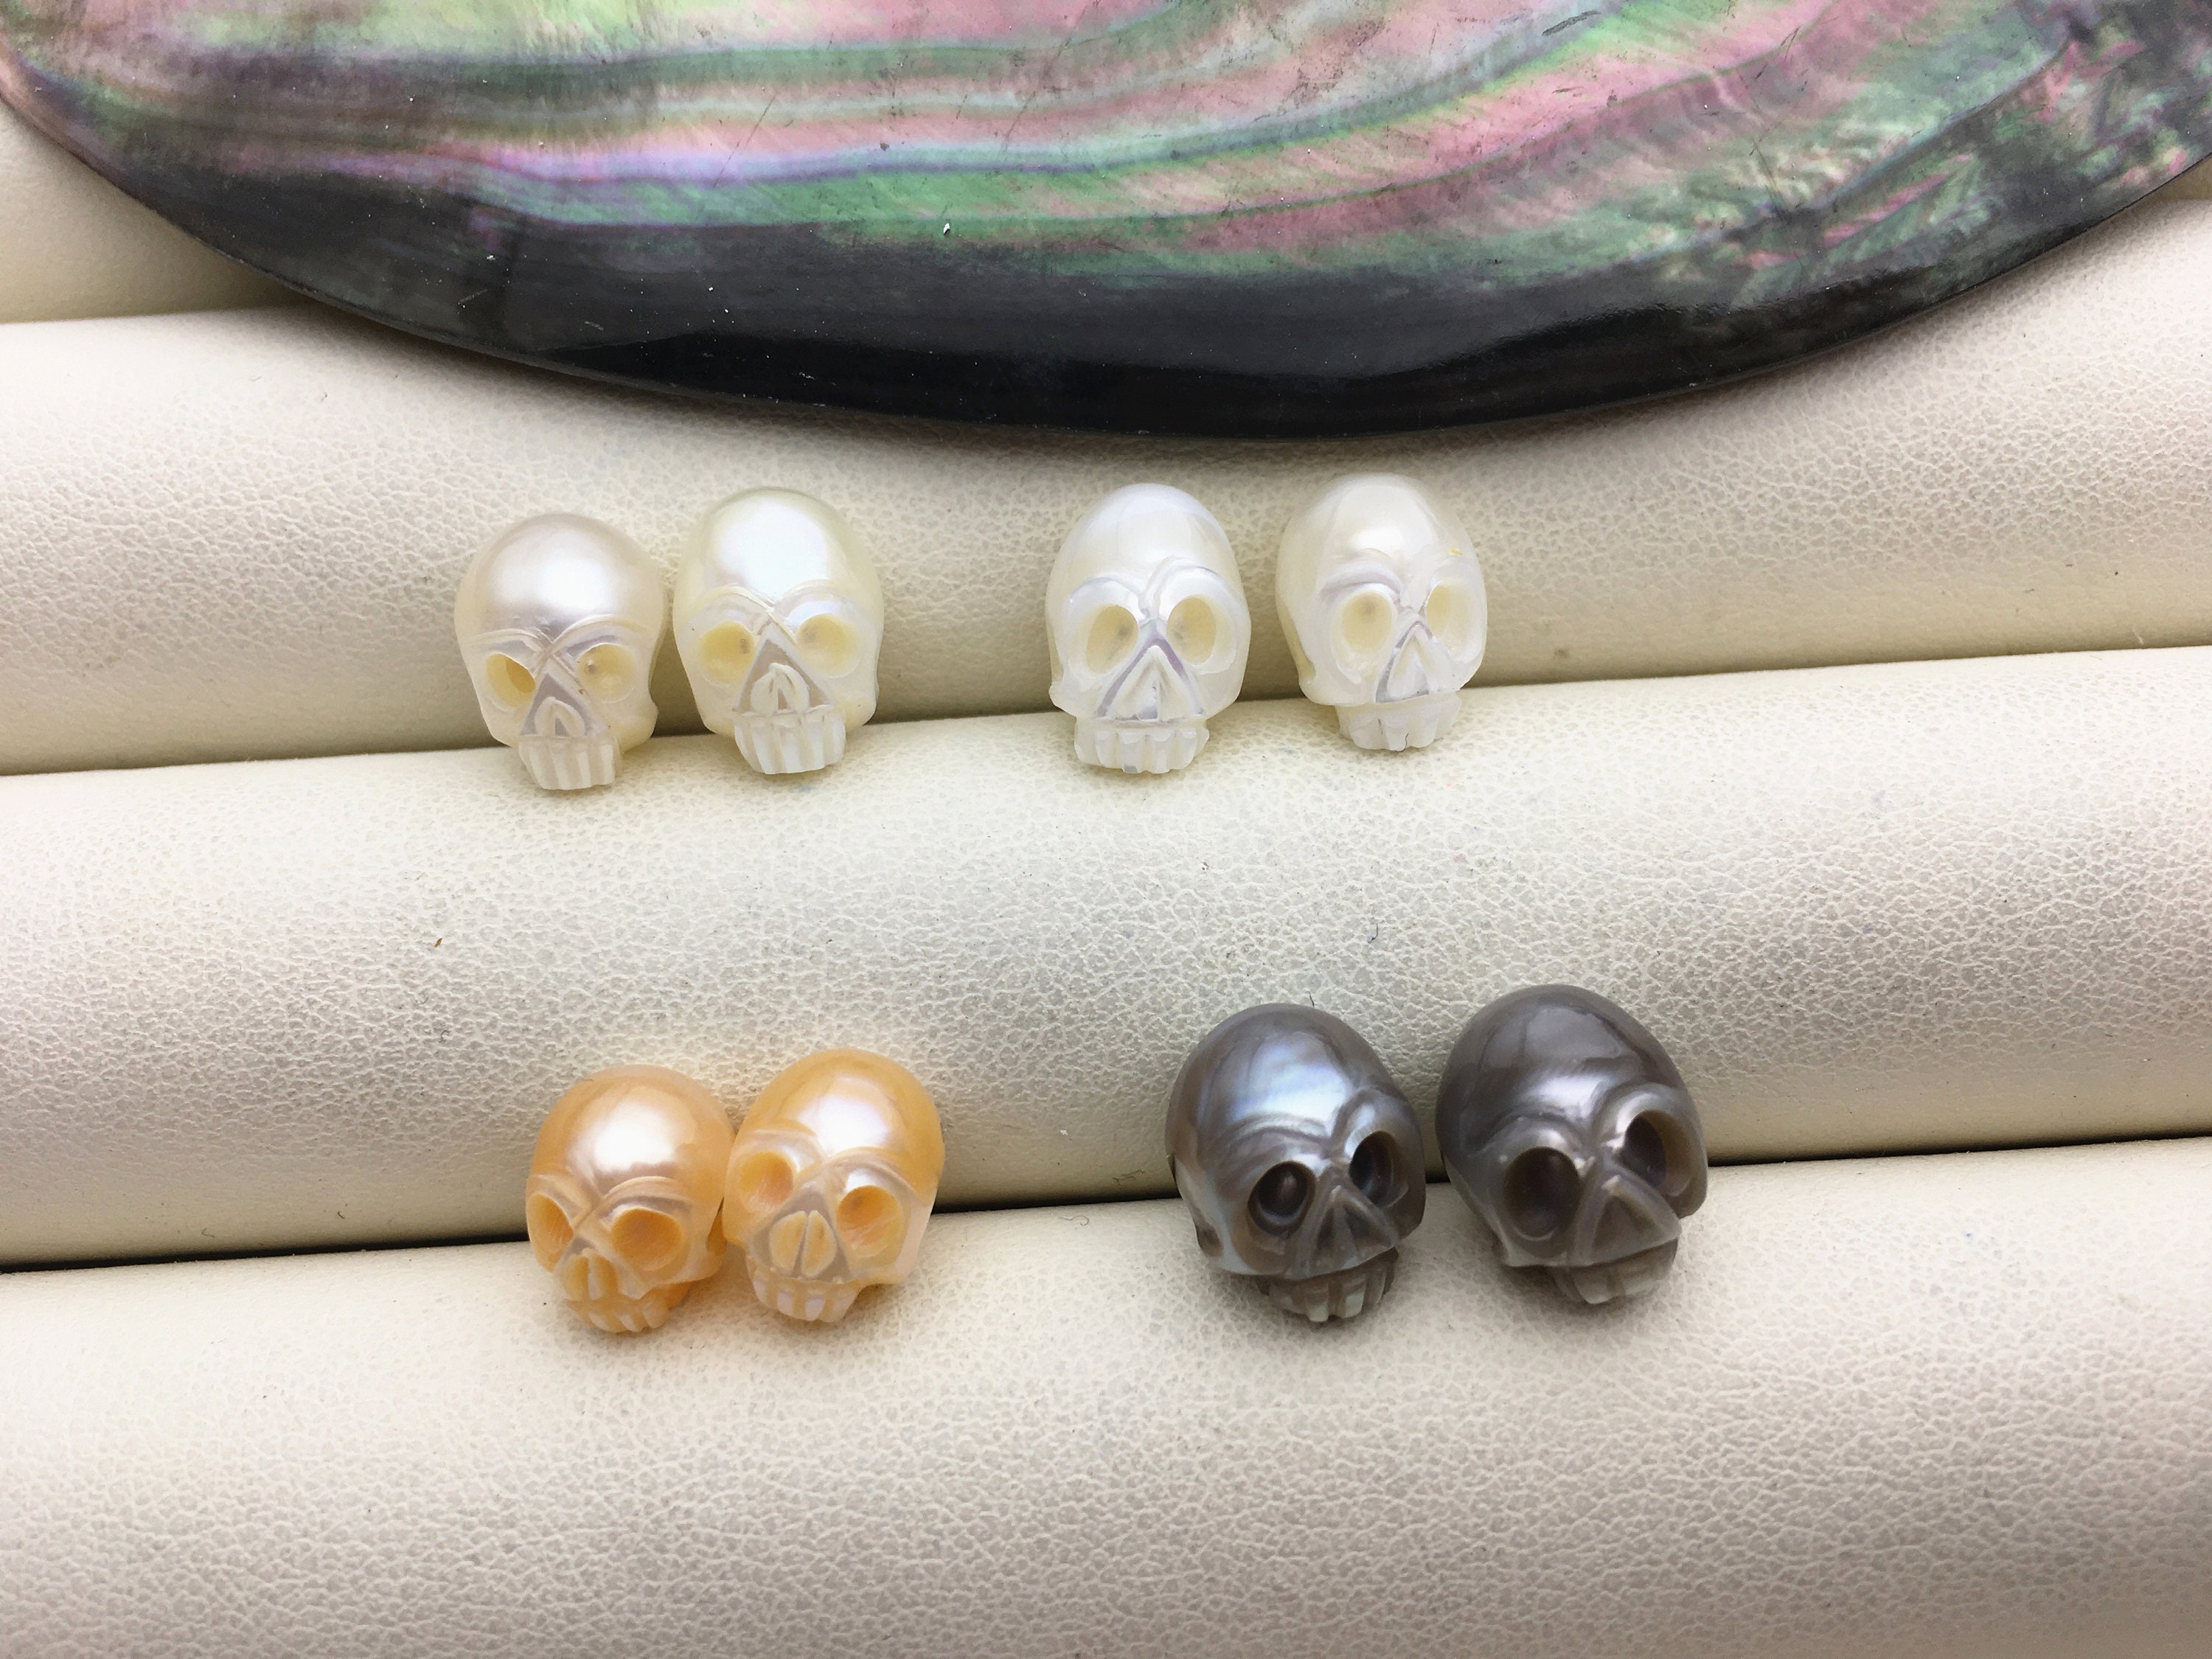 Sugar Skull Beads Tierracast Antique Copper 10mm Big Hole Beads, Large  Hole, Qty 4, Rose Skulls Viva Mexicana, Day of the Dead Jewelry 